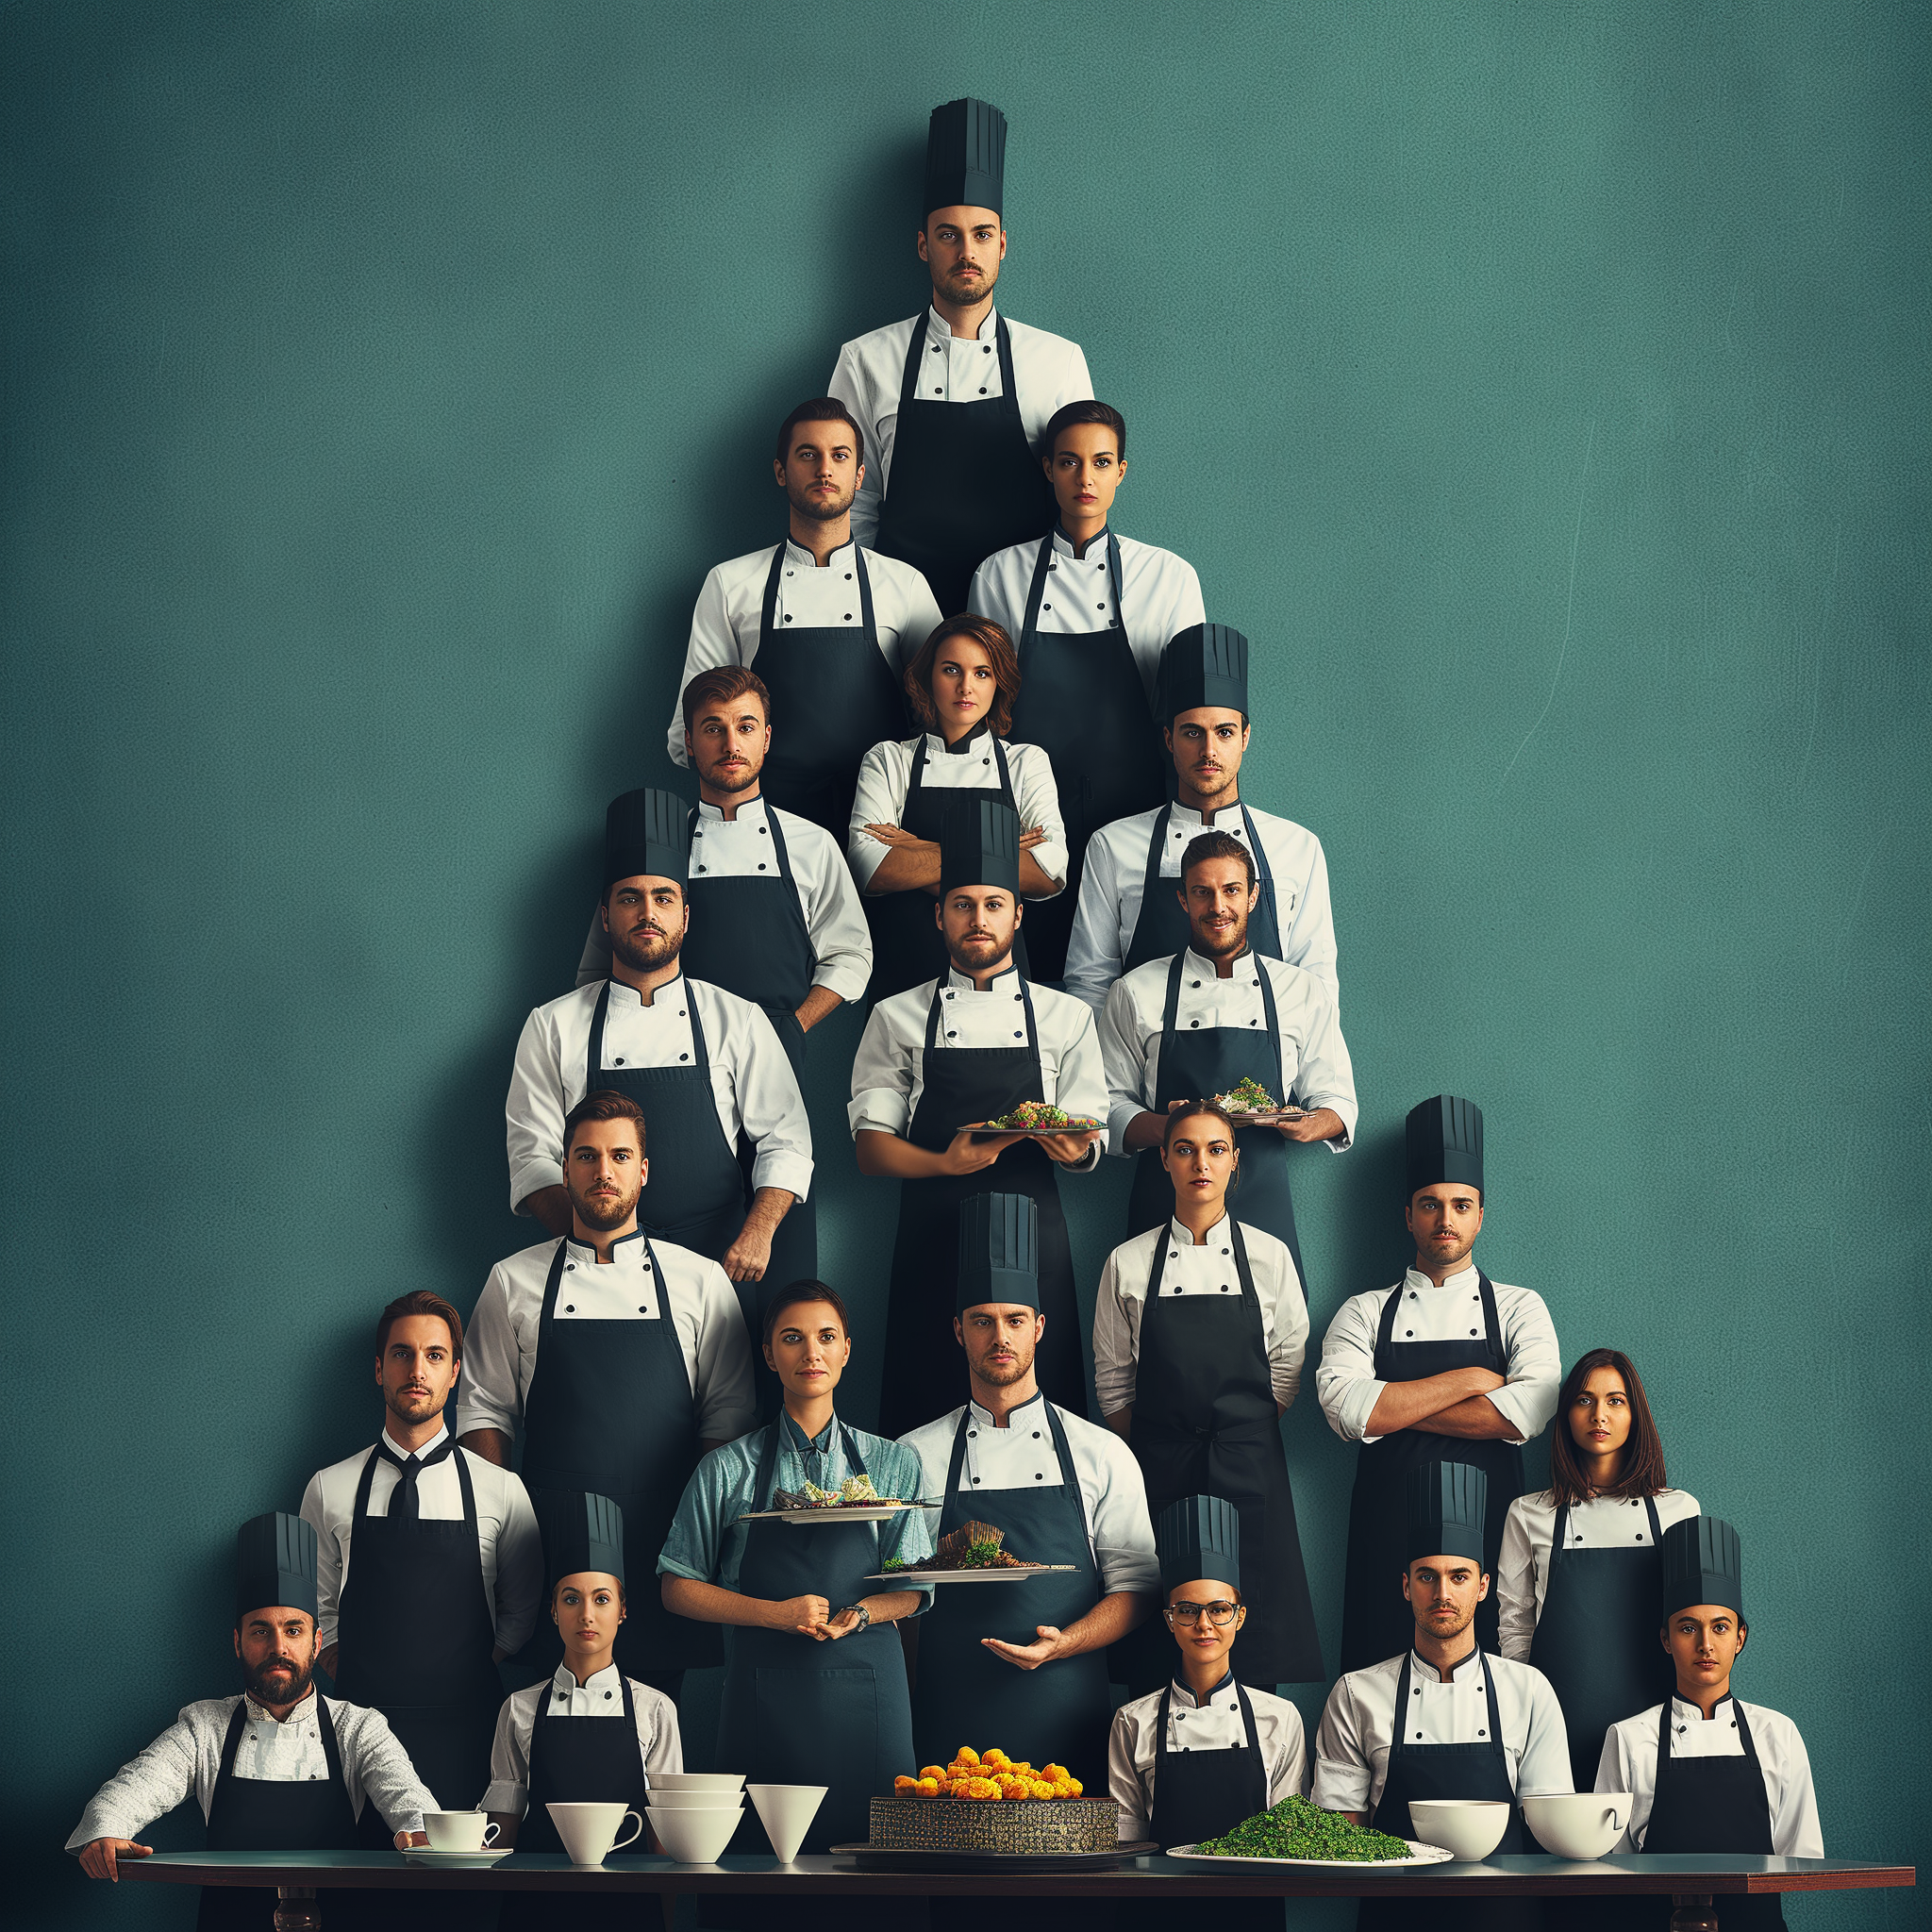 How to Build a Winning Restaurant Team from Scratch